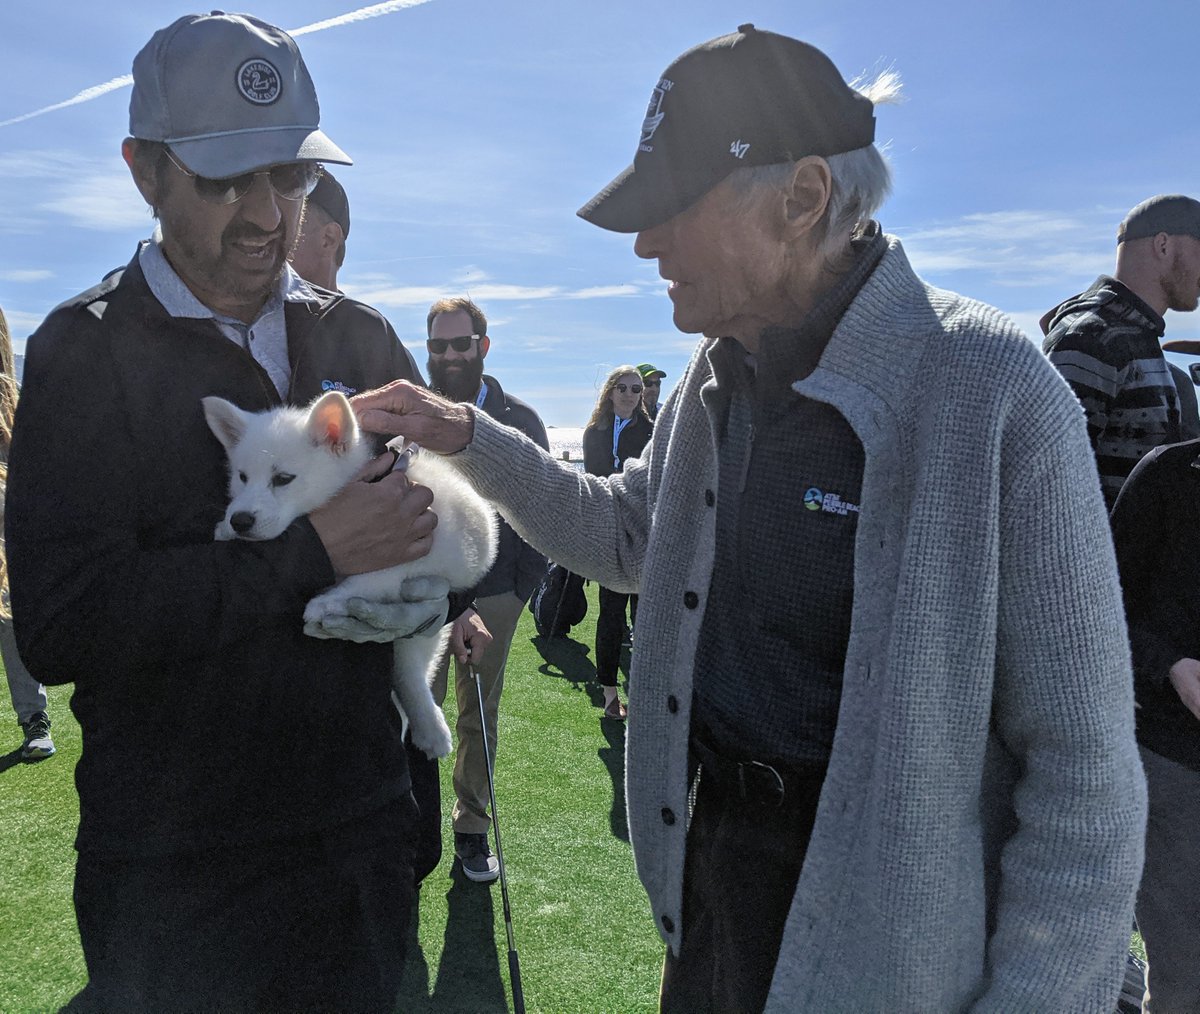 SPCA Monterey County på Twitter: "Guess who is available for adoption? not Ray Romano Clint Eastwood...it's Odie! this celebrity-magnet puppy today at the SPCA! #attproam #golfdogs… https://t.co/HxhdHmatjI"